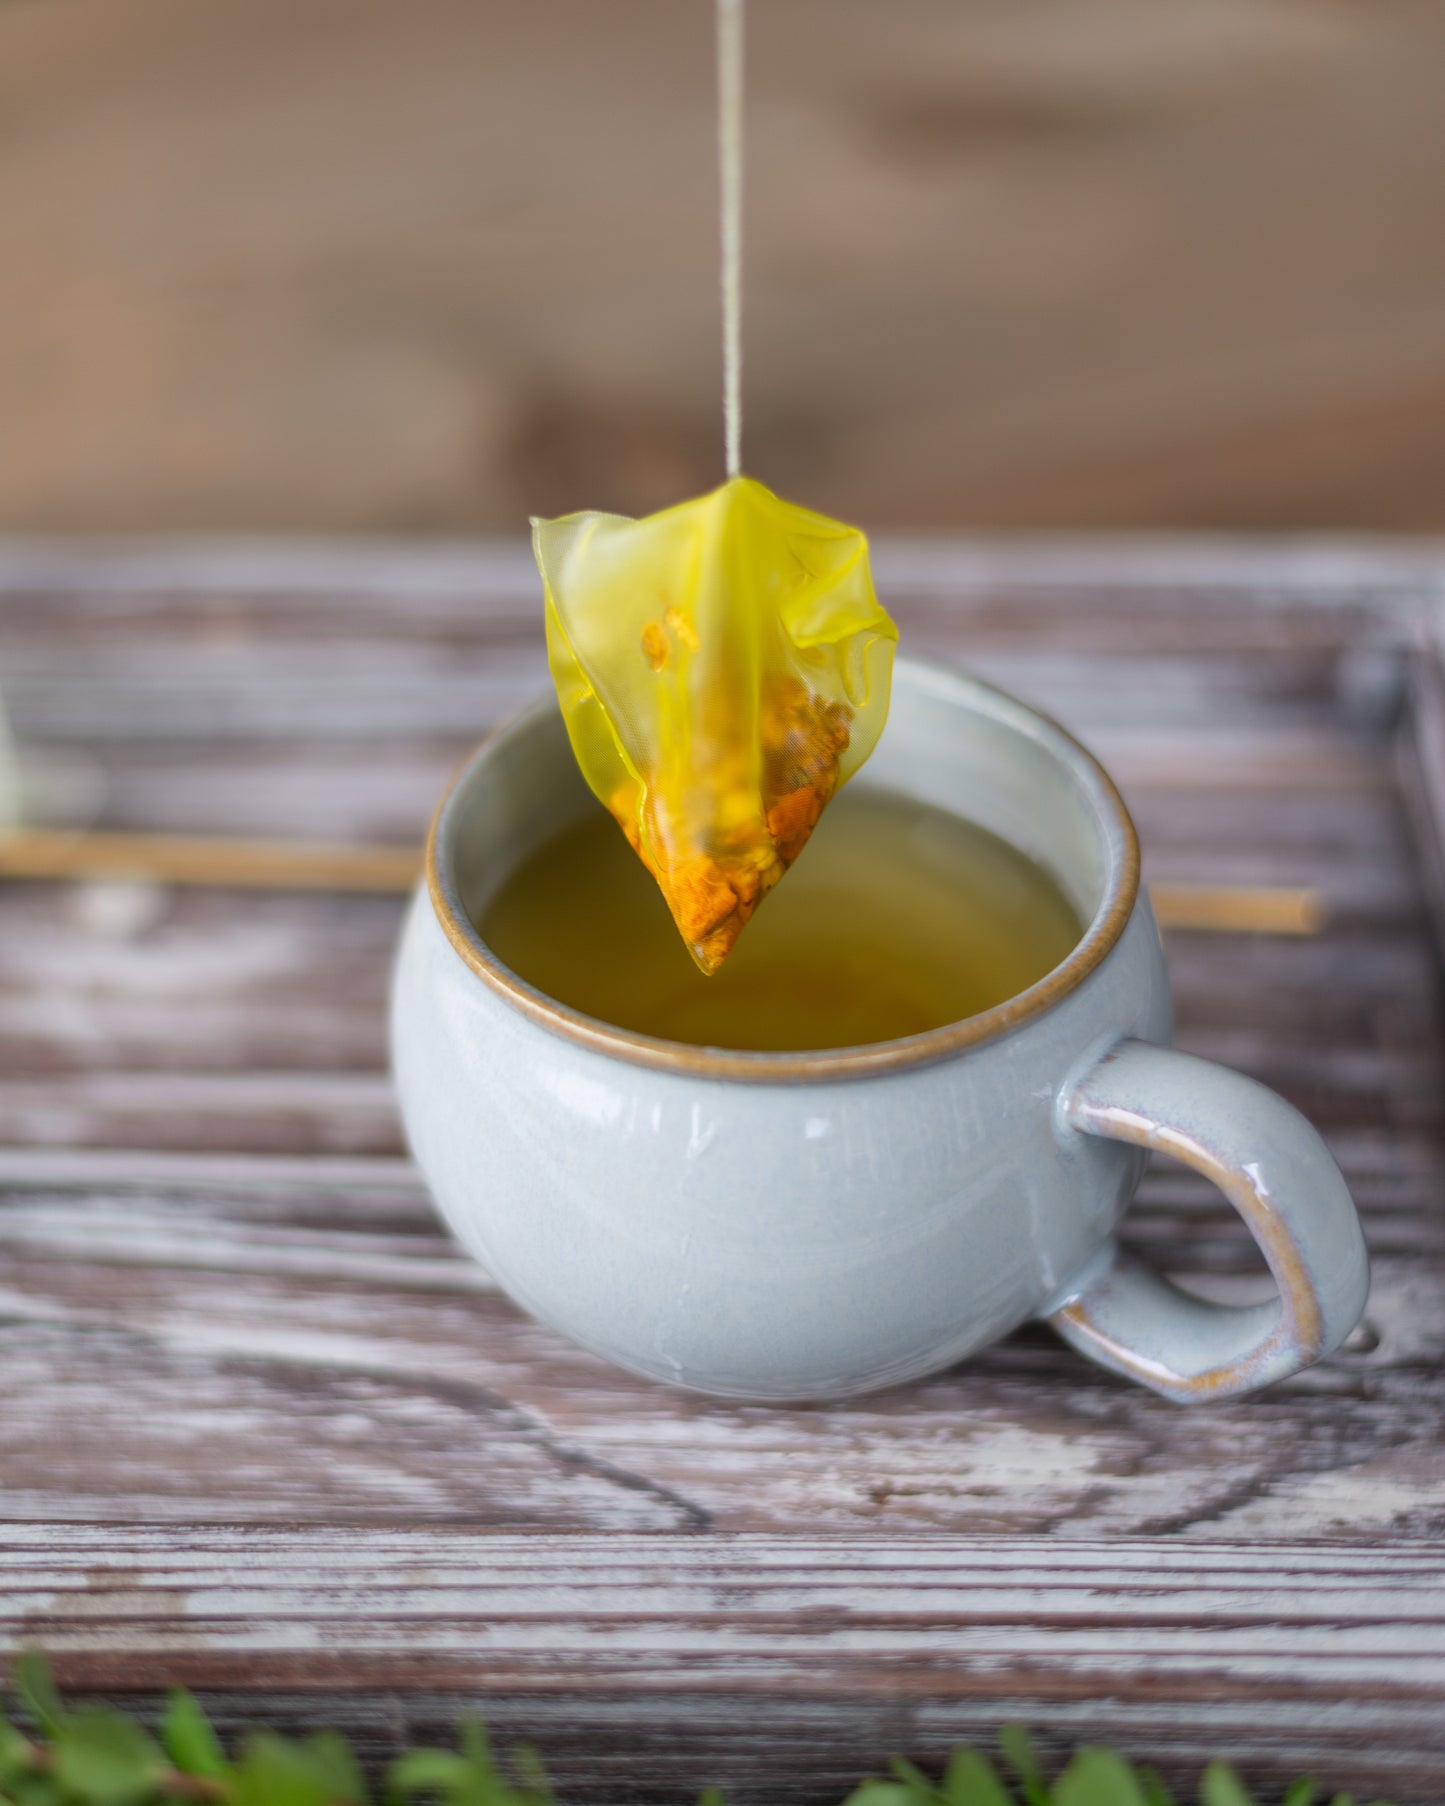  Turmeric tea has been proven to have anti-inflammatory properties, boost immunity, relieve pain, and ease digestion 